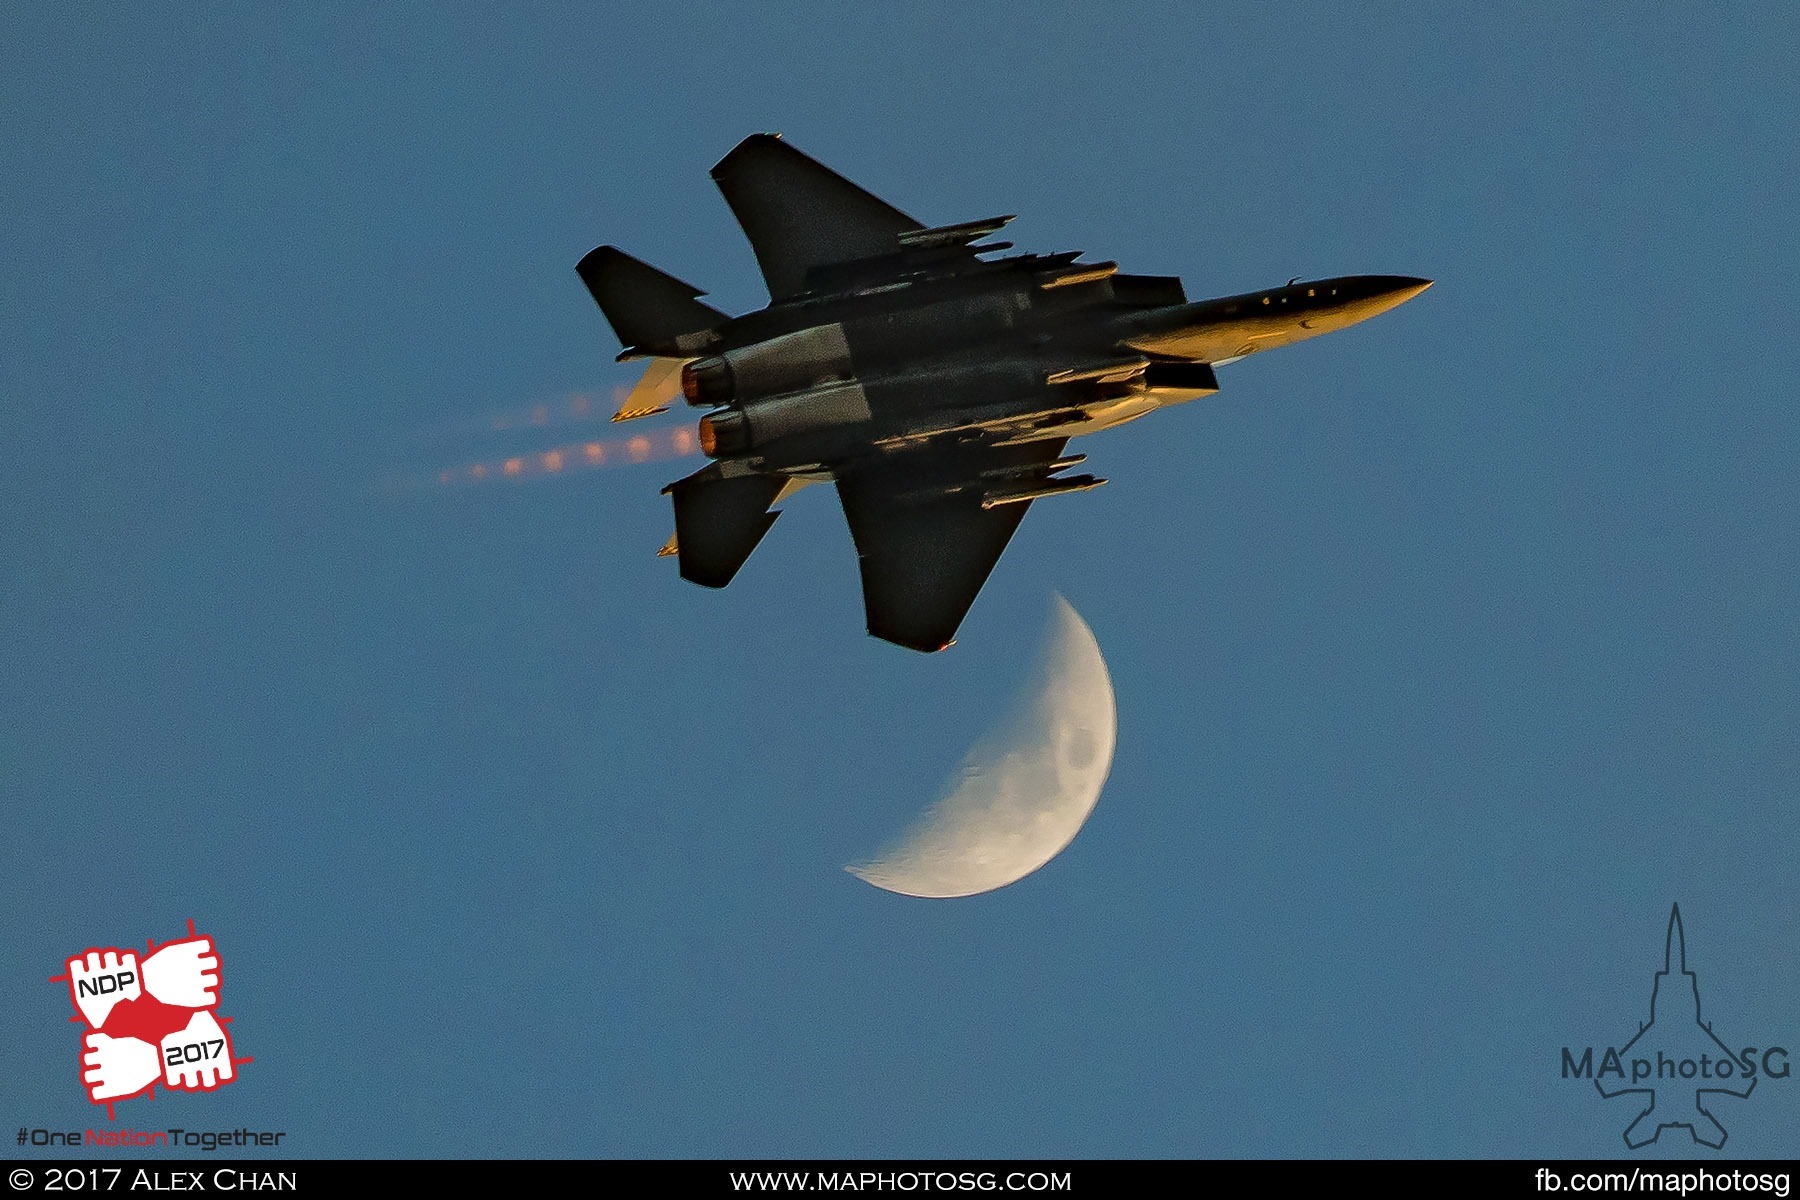 23. A single F-15SG passes the moon after the Salute to the Nation.